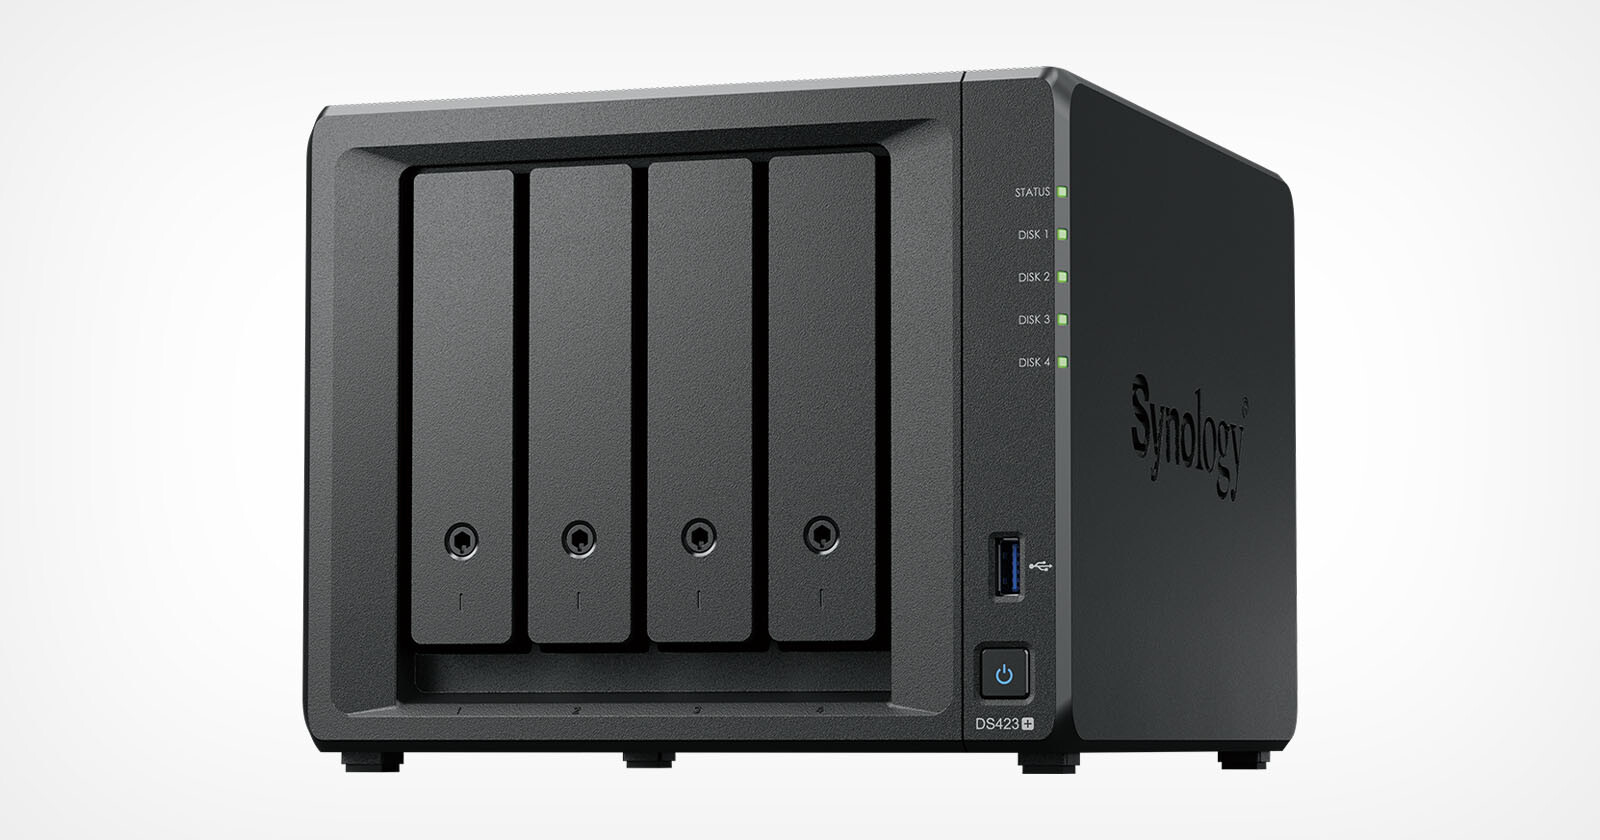  synology diskstation ds423 4-bay nas your 